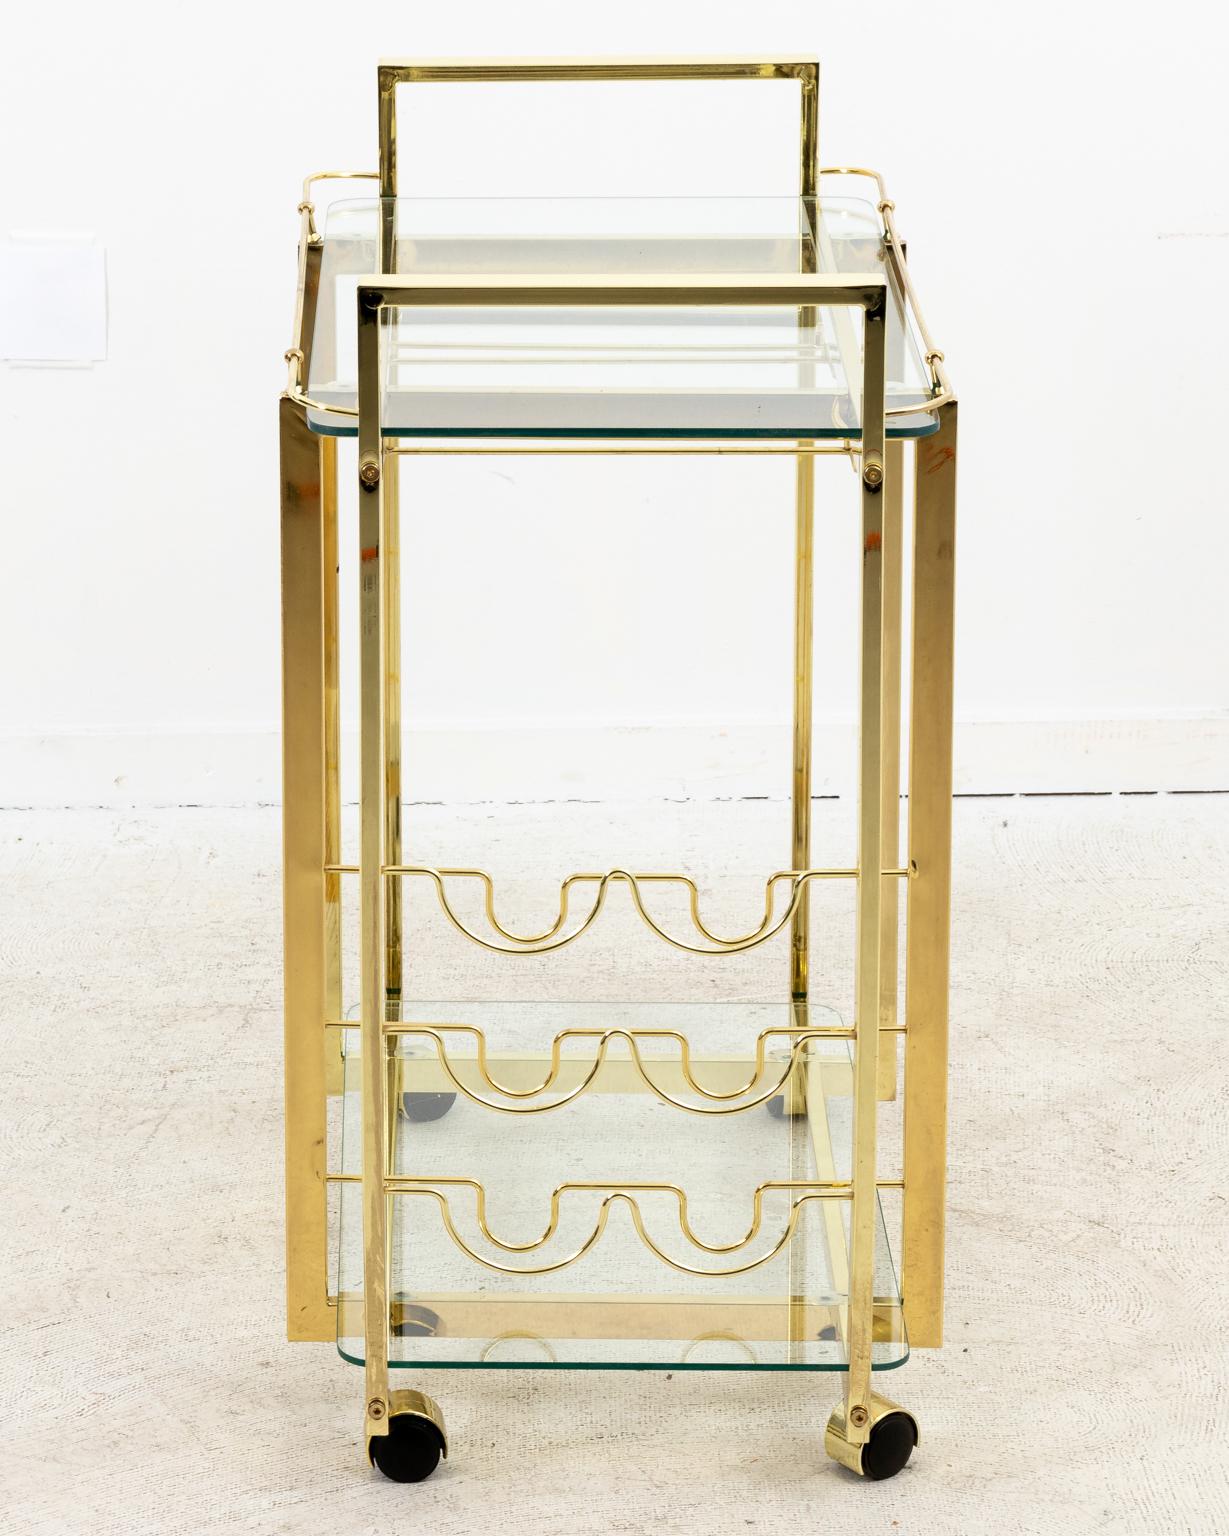 Modern style two-tier brass bar cart with glass shelves on casters in a polished finish, circa 1980s. The piece also comes with bottle racks. Please note of wear consistent with age including minor finish loss, oxidation, and surface scratches to